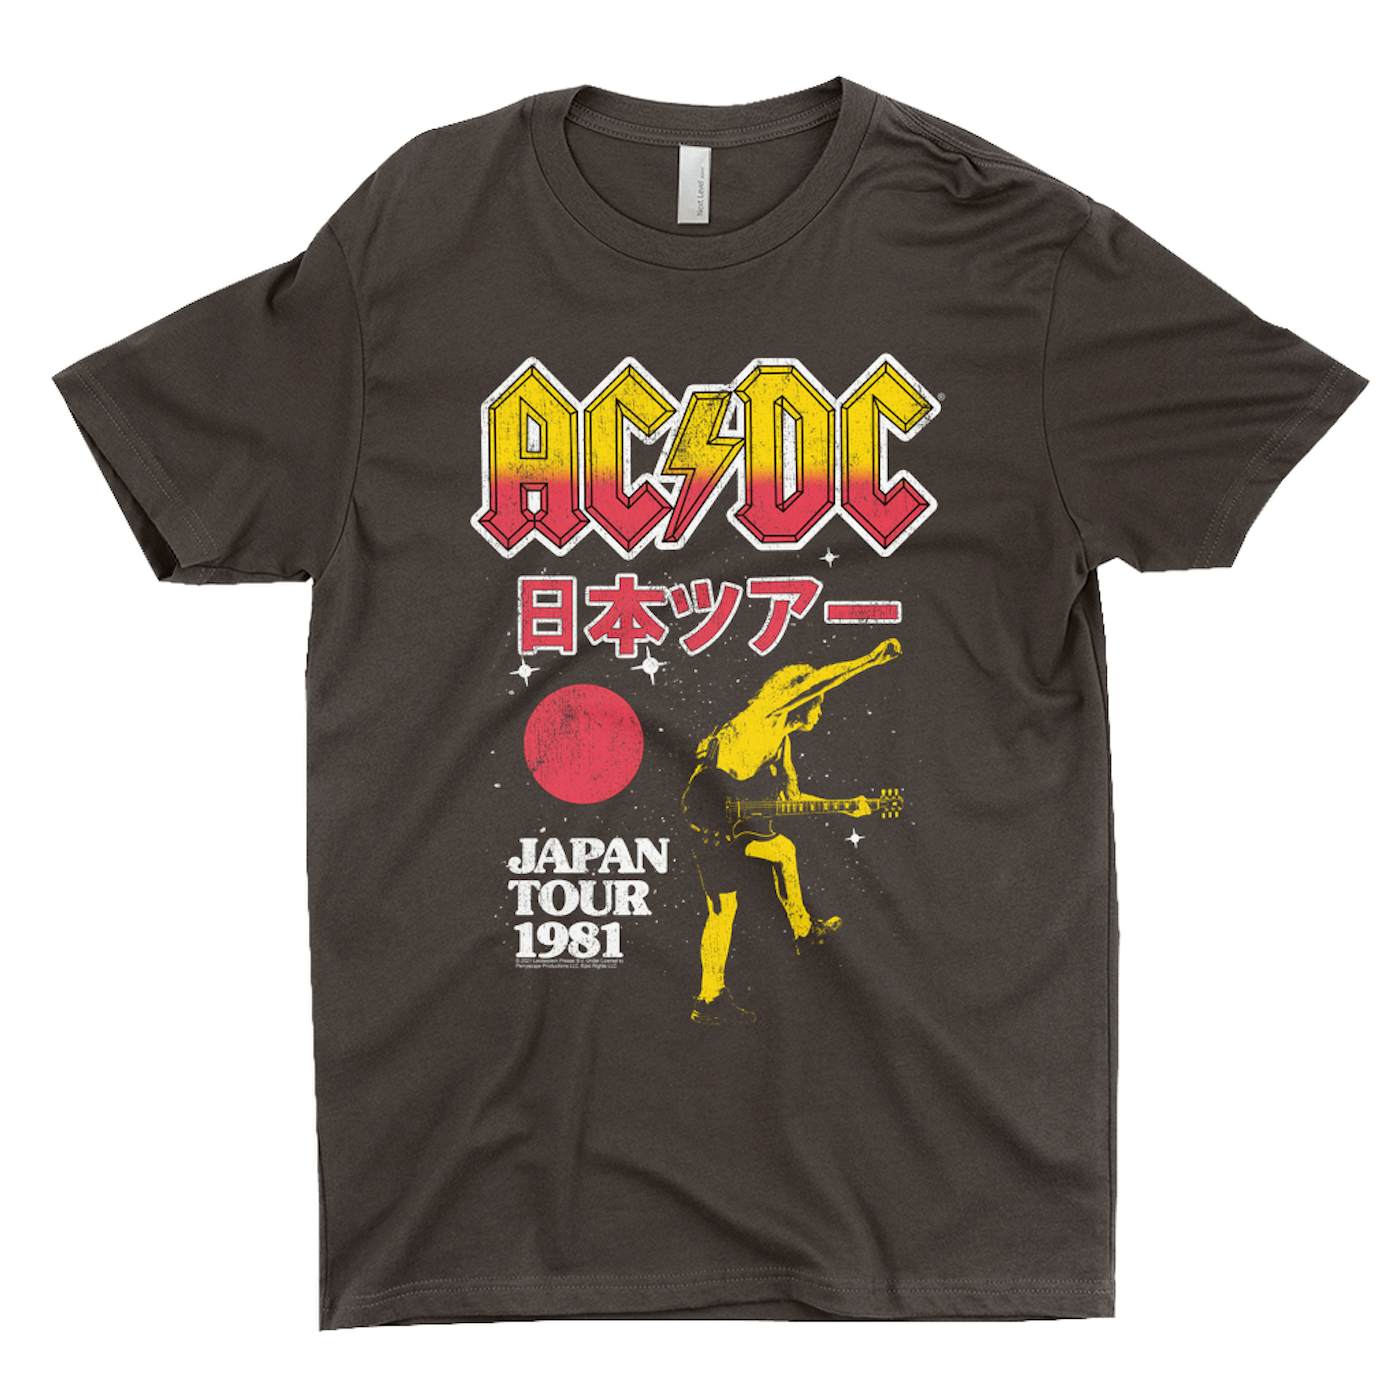 AC/DC Women's Concert T-shirt by Chaser - Japan Tour 1981